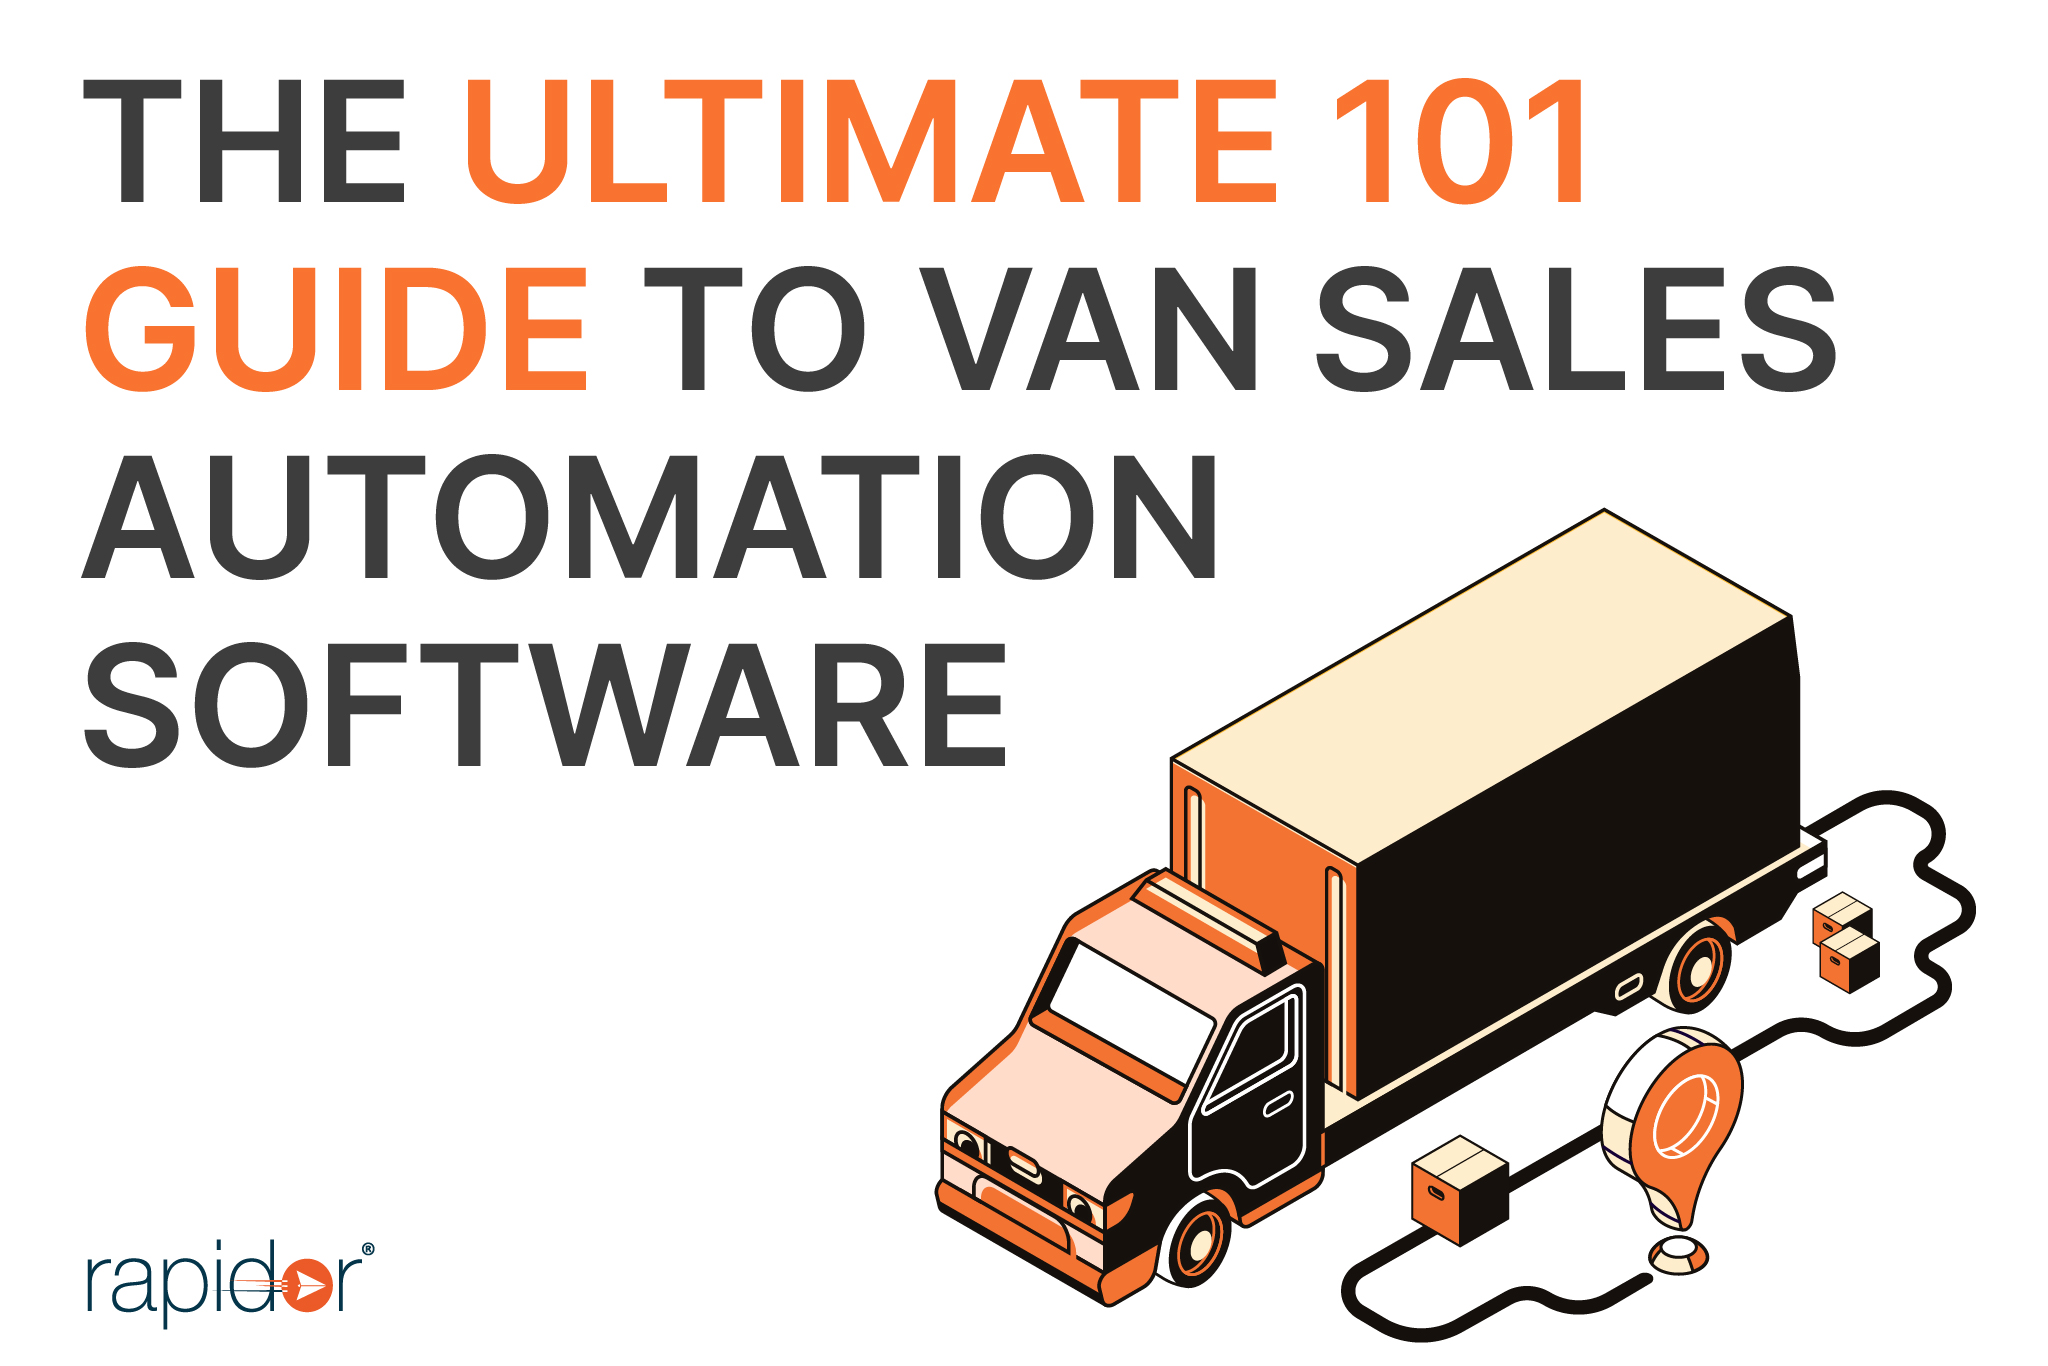 Guide to Van Sales Automation Software